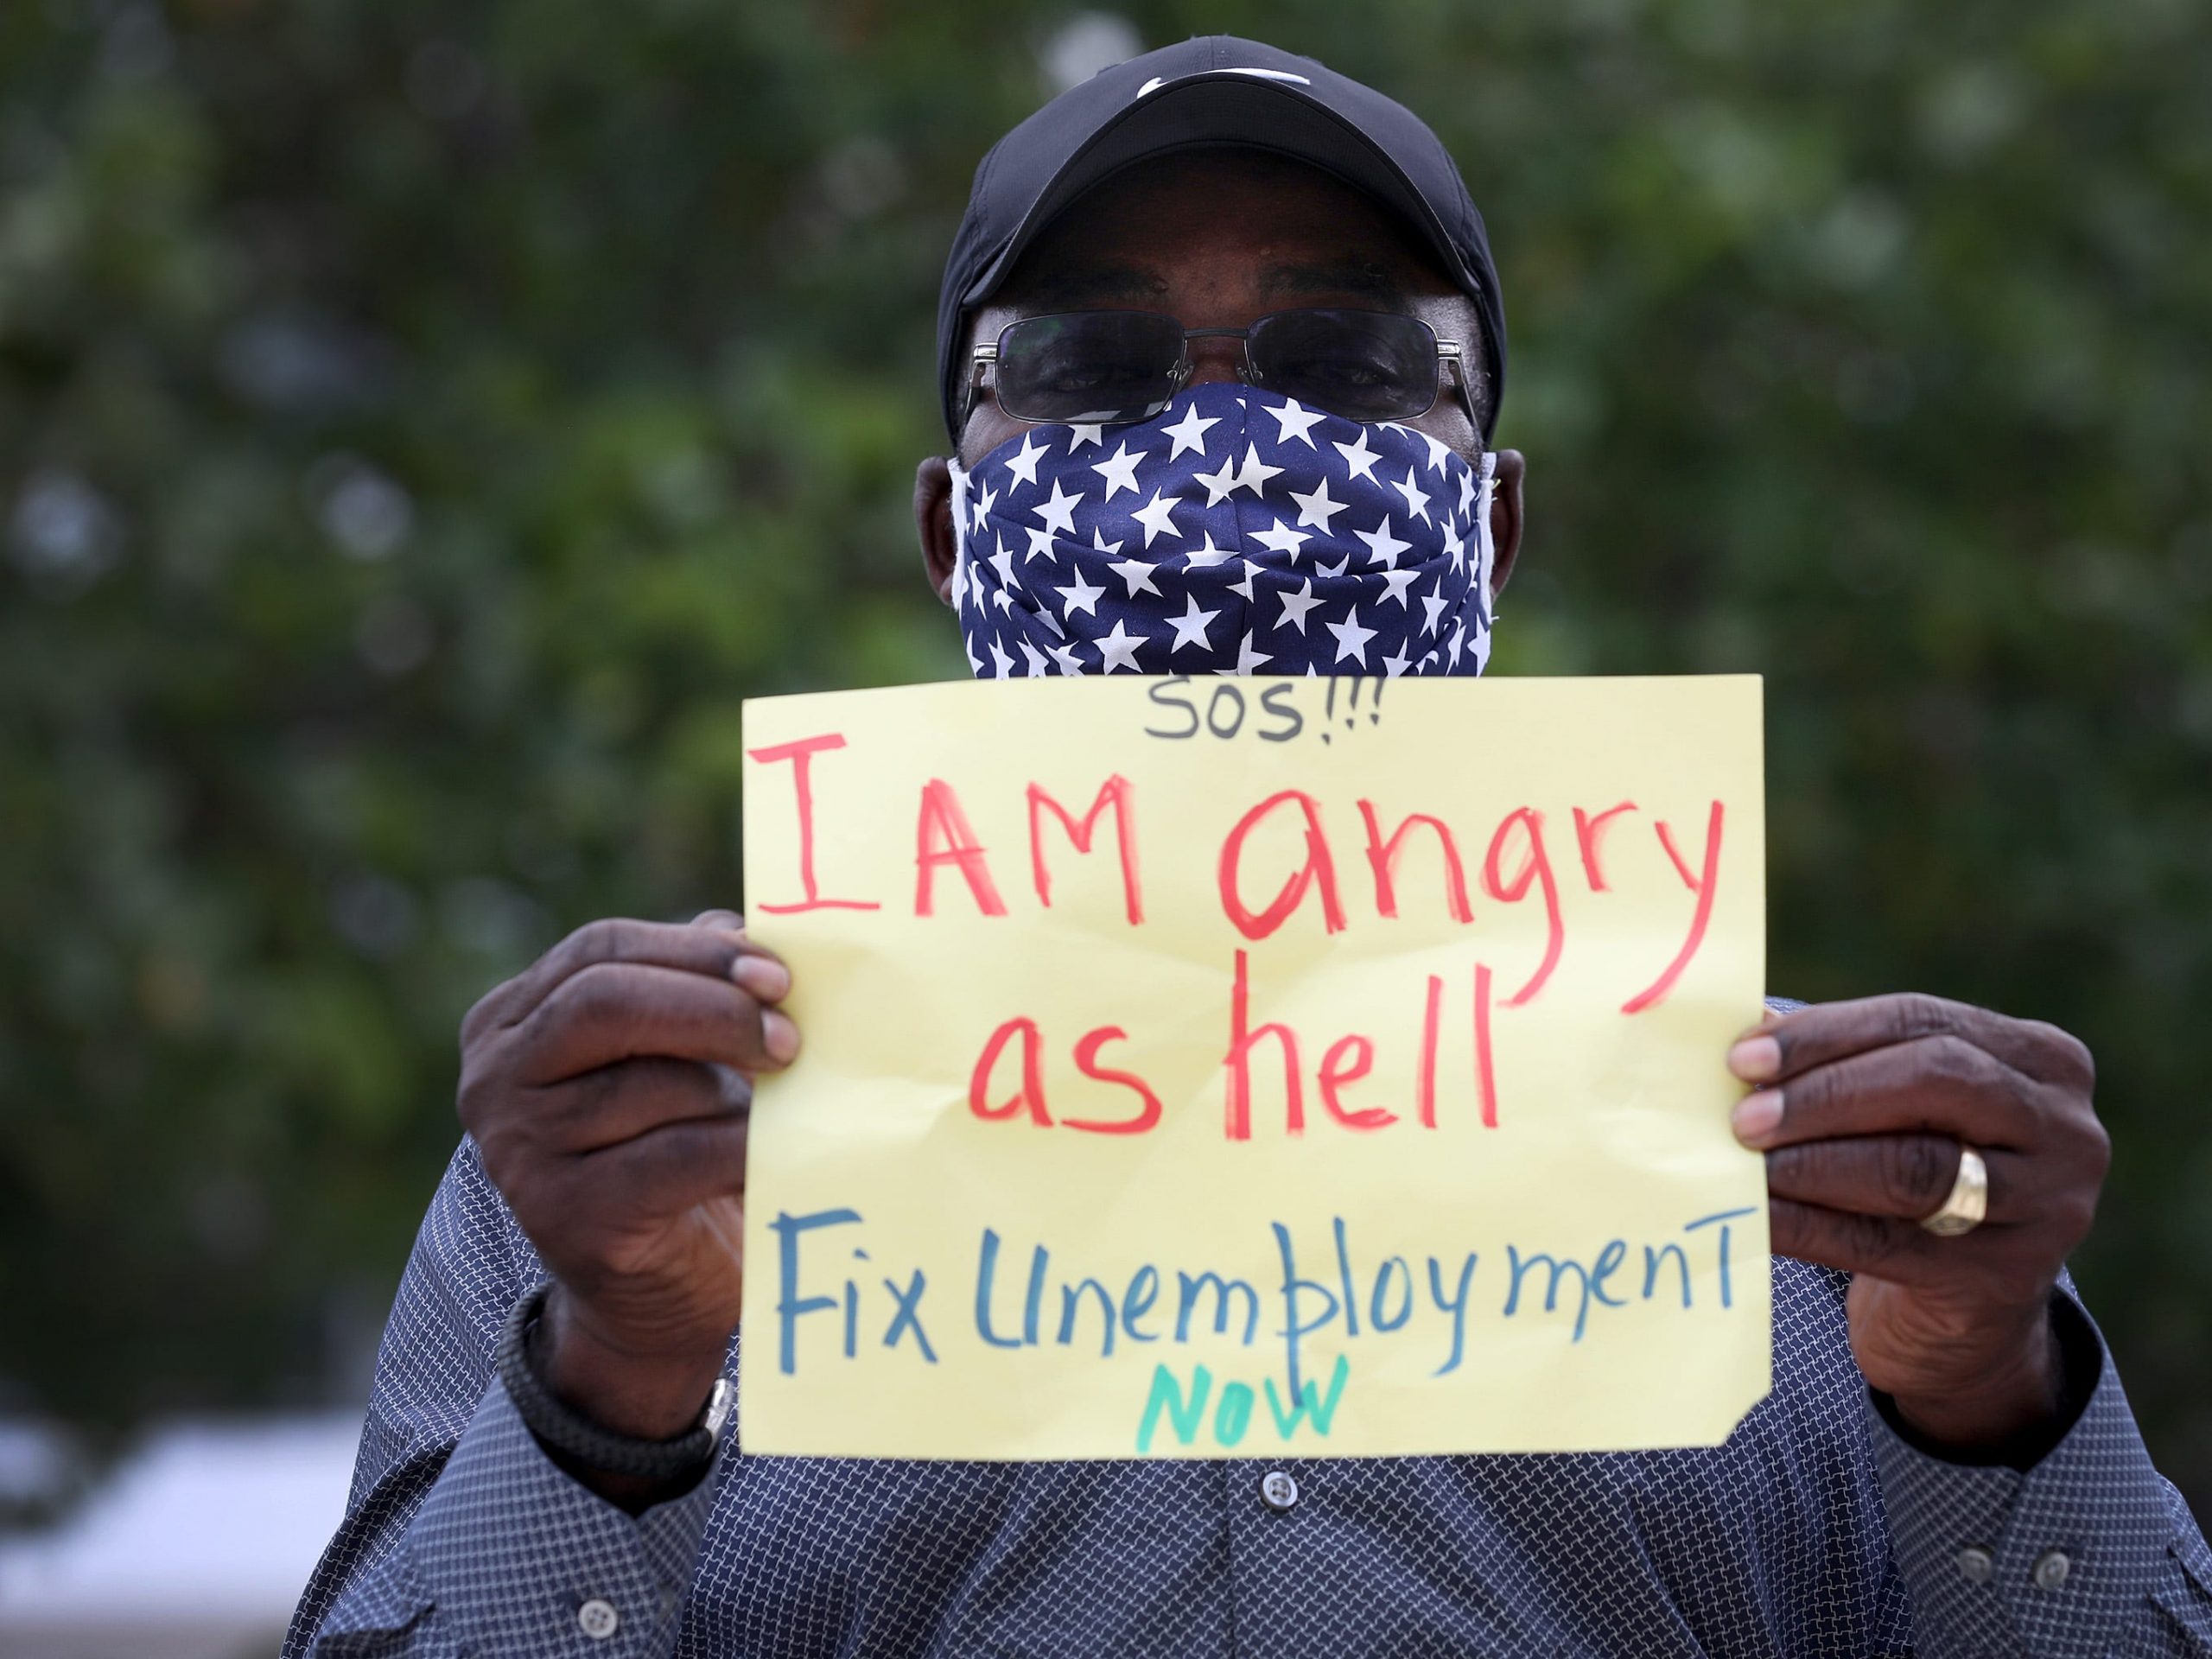 an unemployed worker holds a sign that says  I Am angry as hell Fix Unemployment Now,'